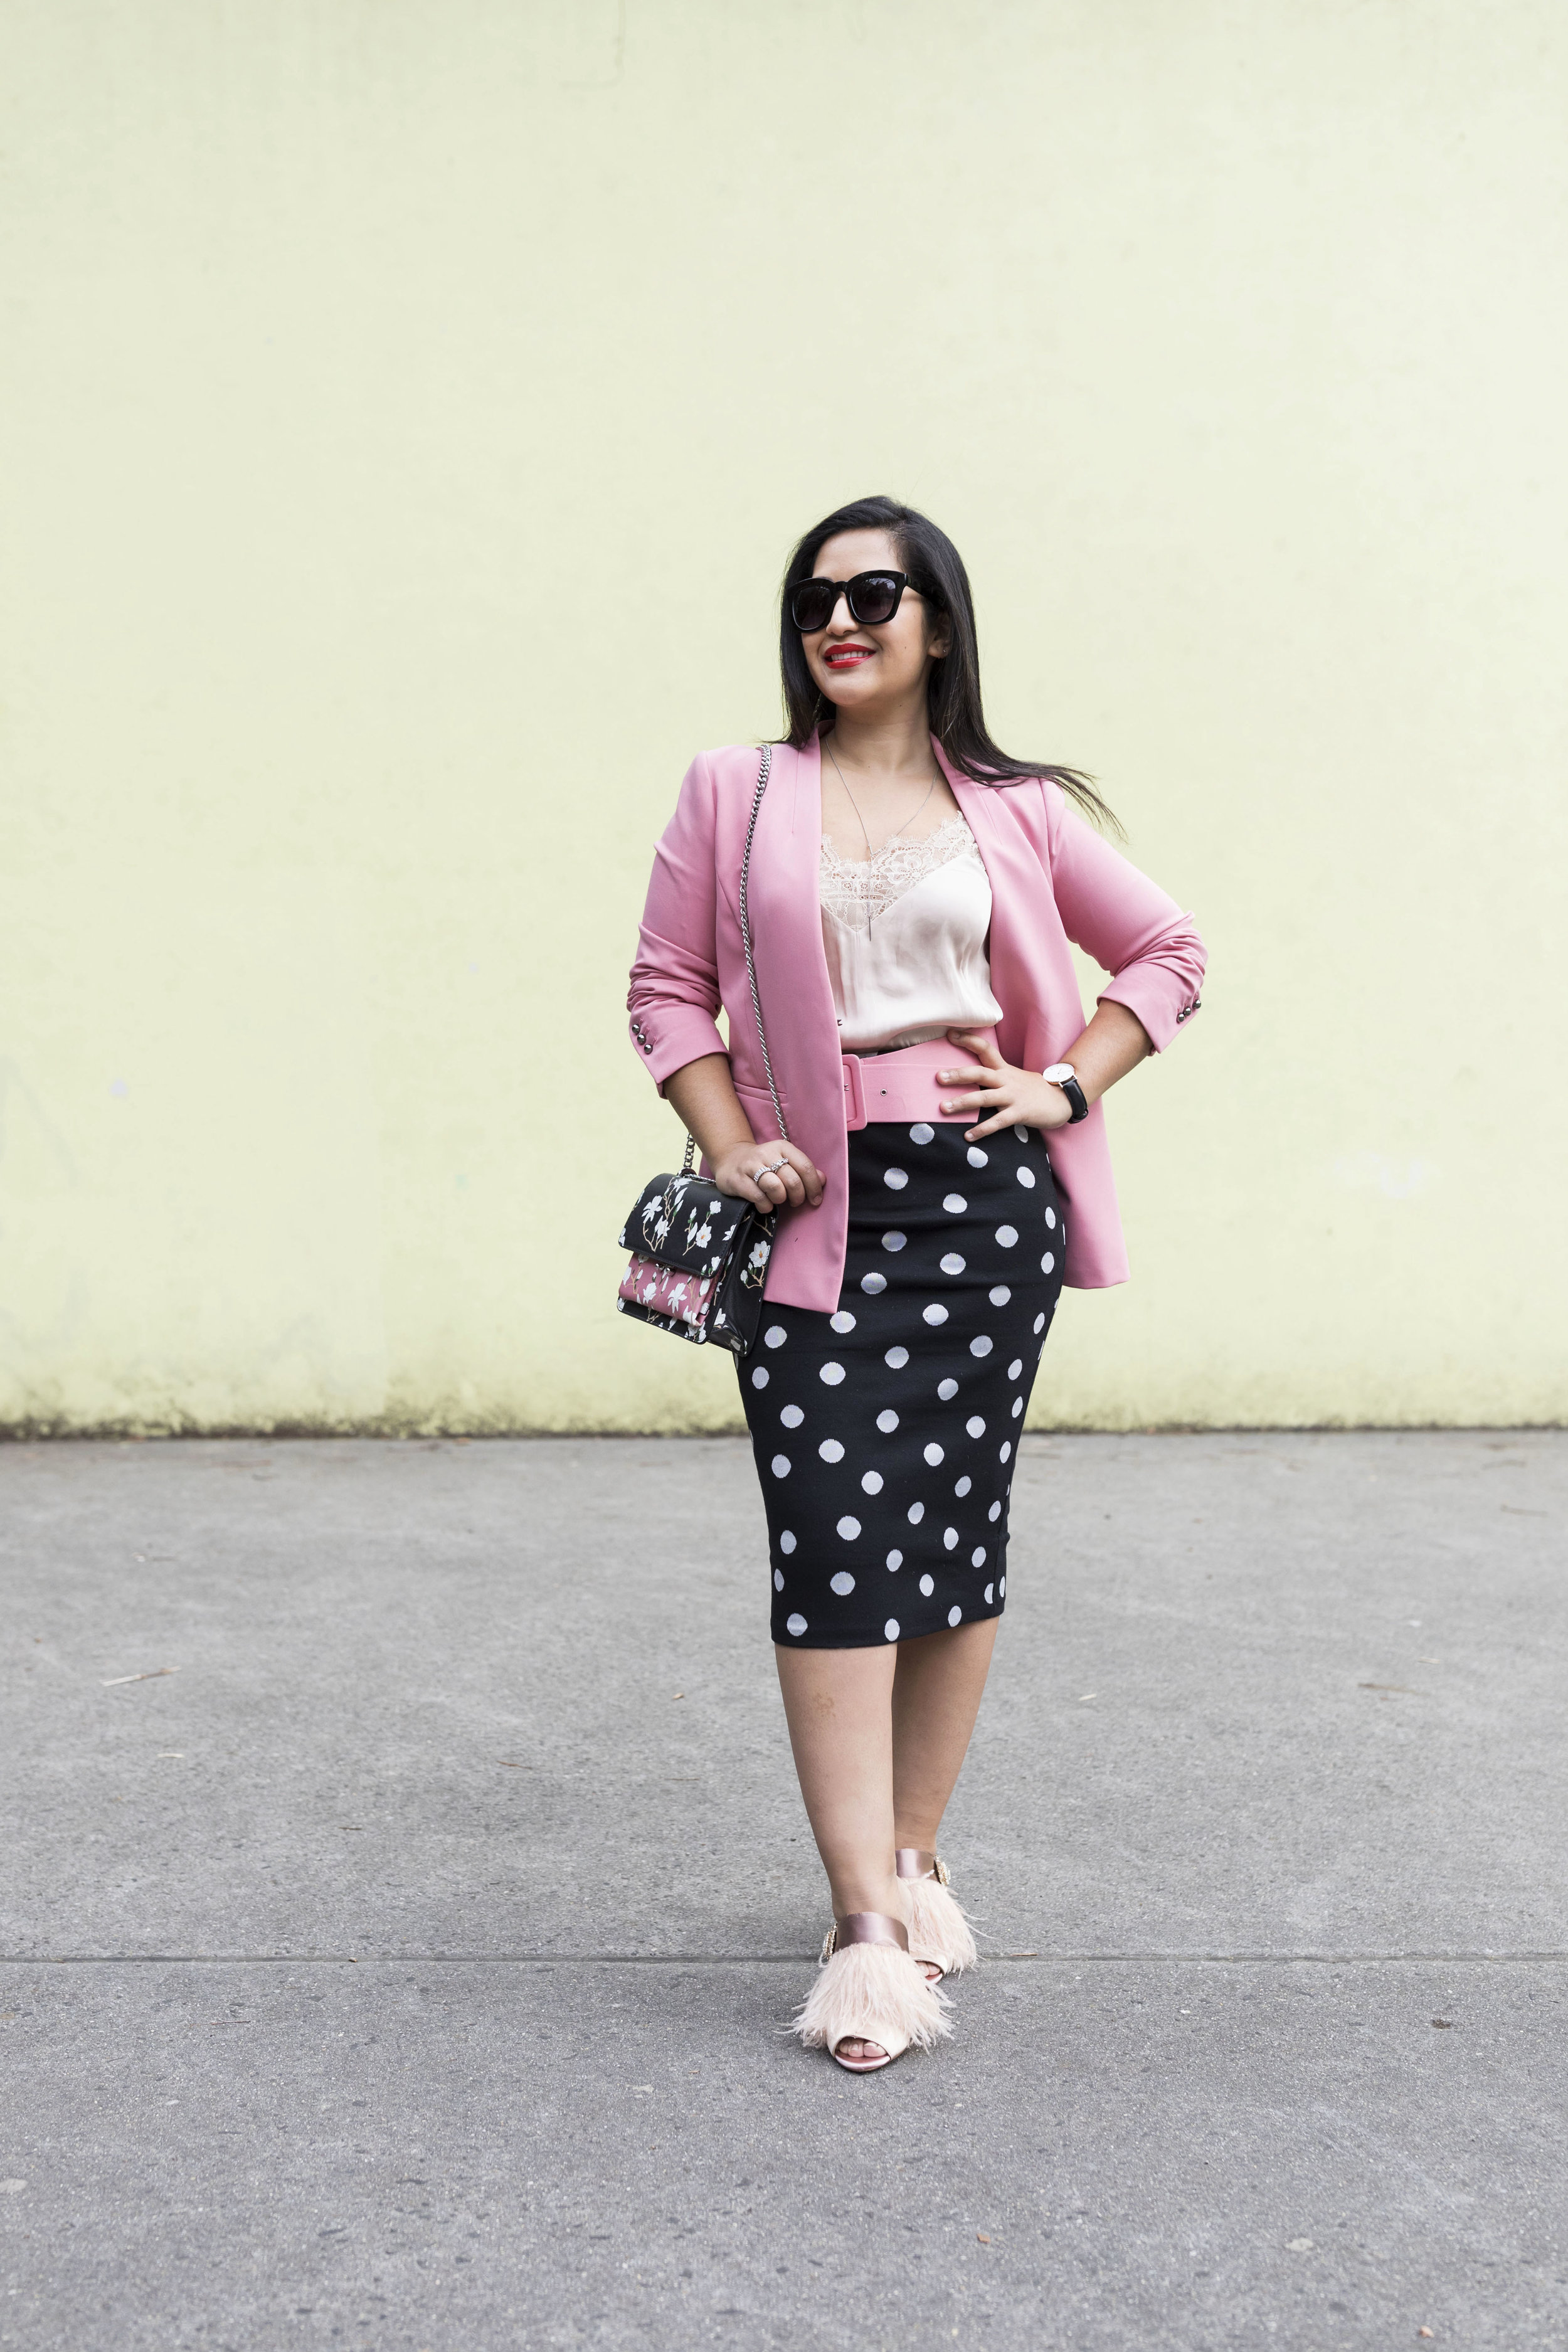 Krity S x Polka Dot and Pink Work Outfit1.jpg